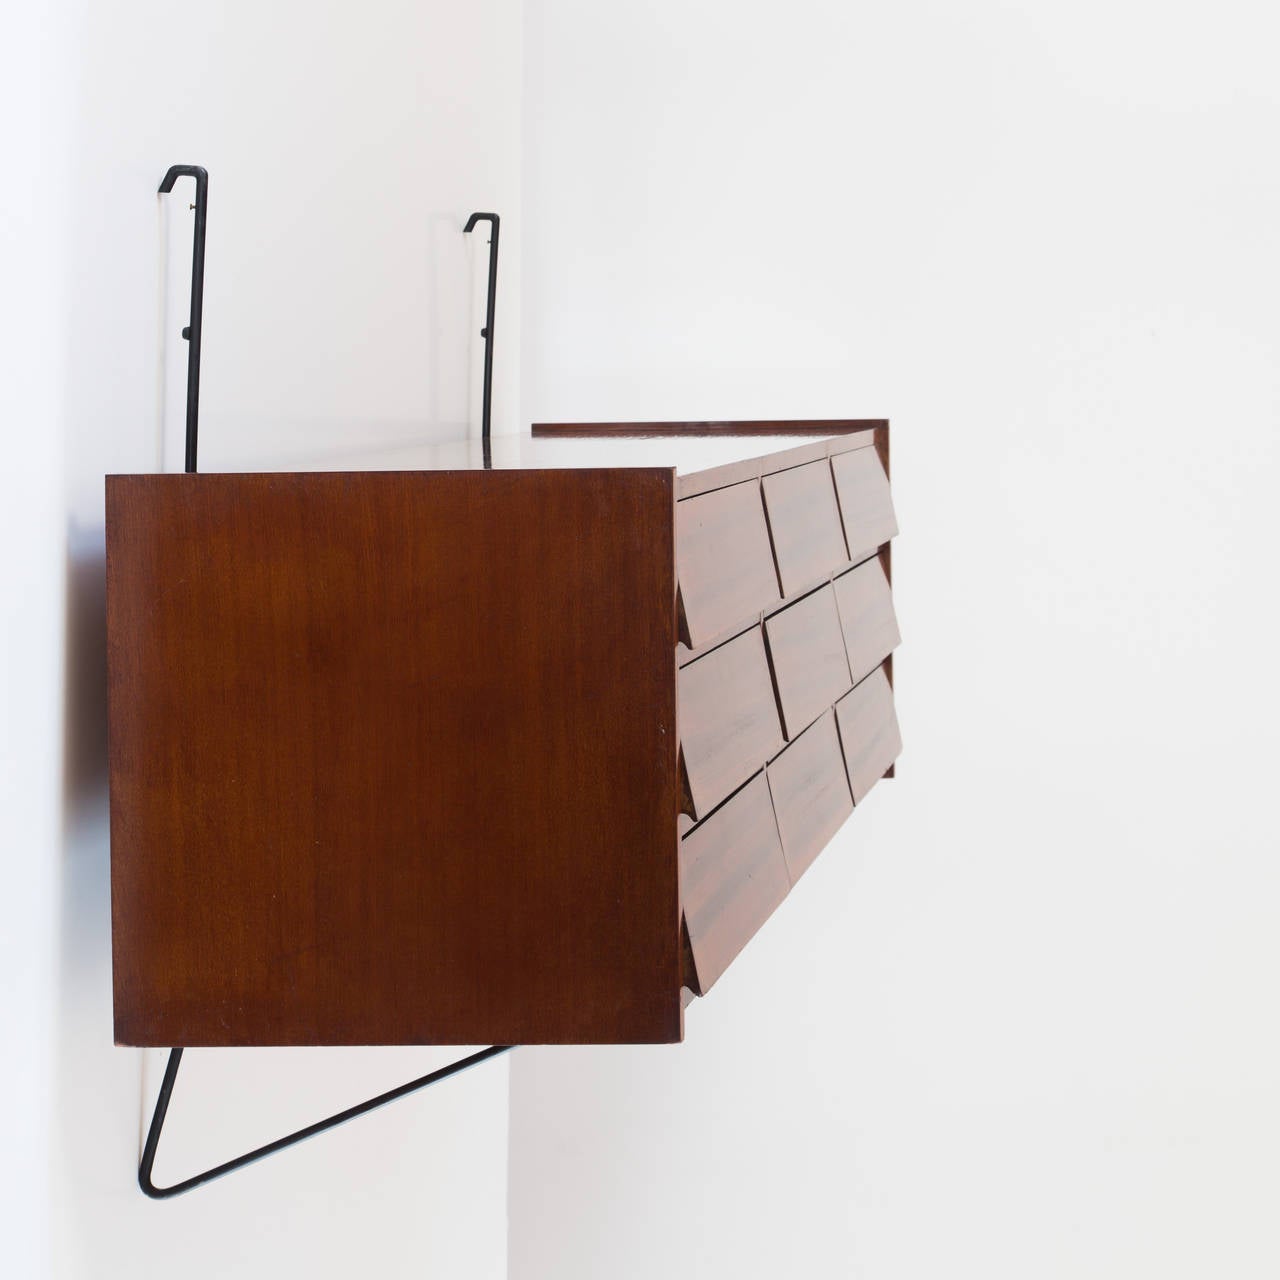 Extraordinary hanging and floating chest of drawers by Sergio Conti, Marisa Forlani and Luciano Grassi in 1954 .
Unique item for a private apartment in Florence, Italy.
Walnut, lacquered metal
rare nine drawers.
Measures: H 90 cm, 156 x 46 cm,